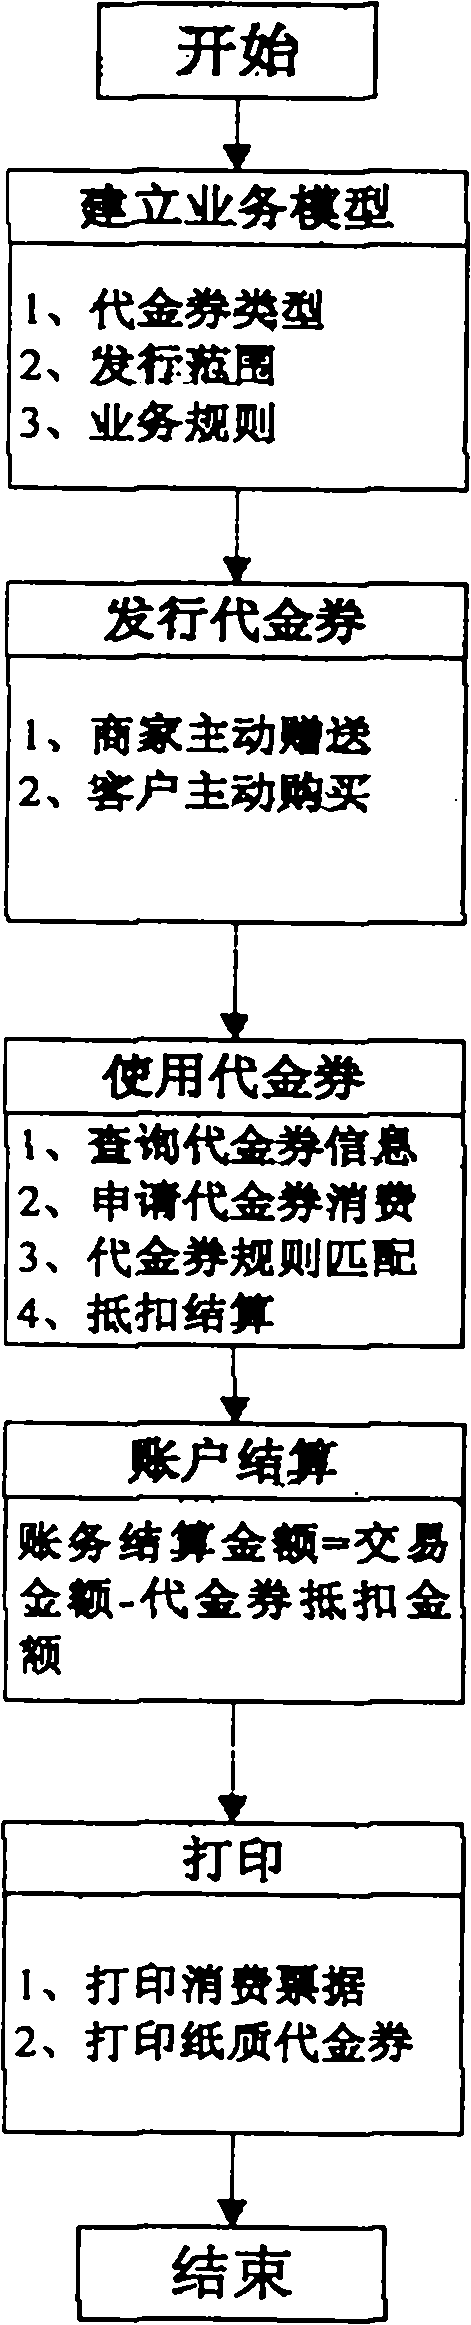 Electronic voucher purchase and payment system and method based on all-in-one card platform